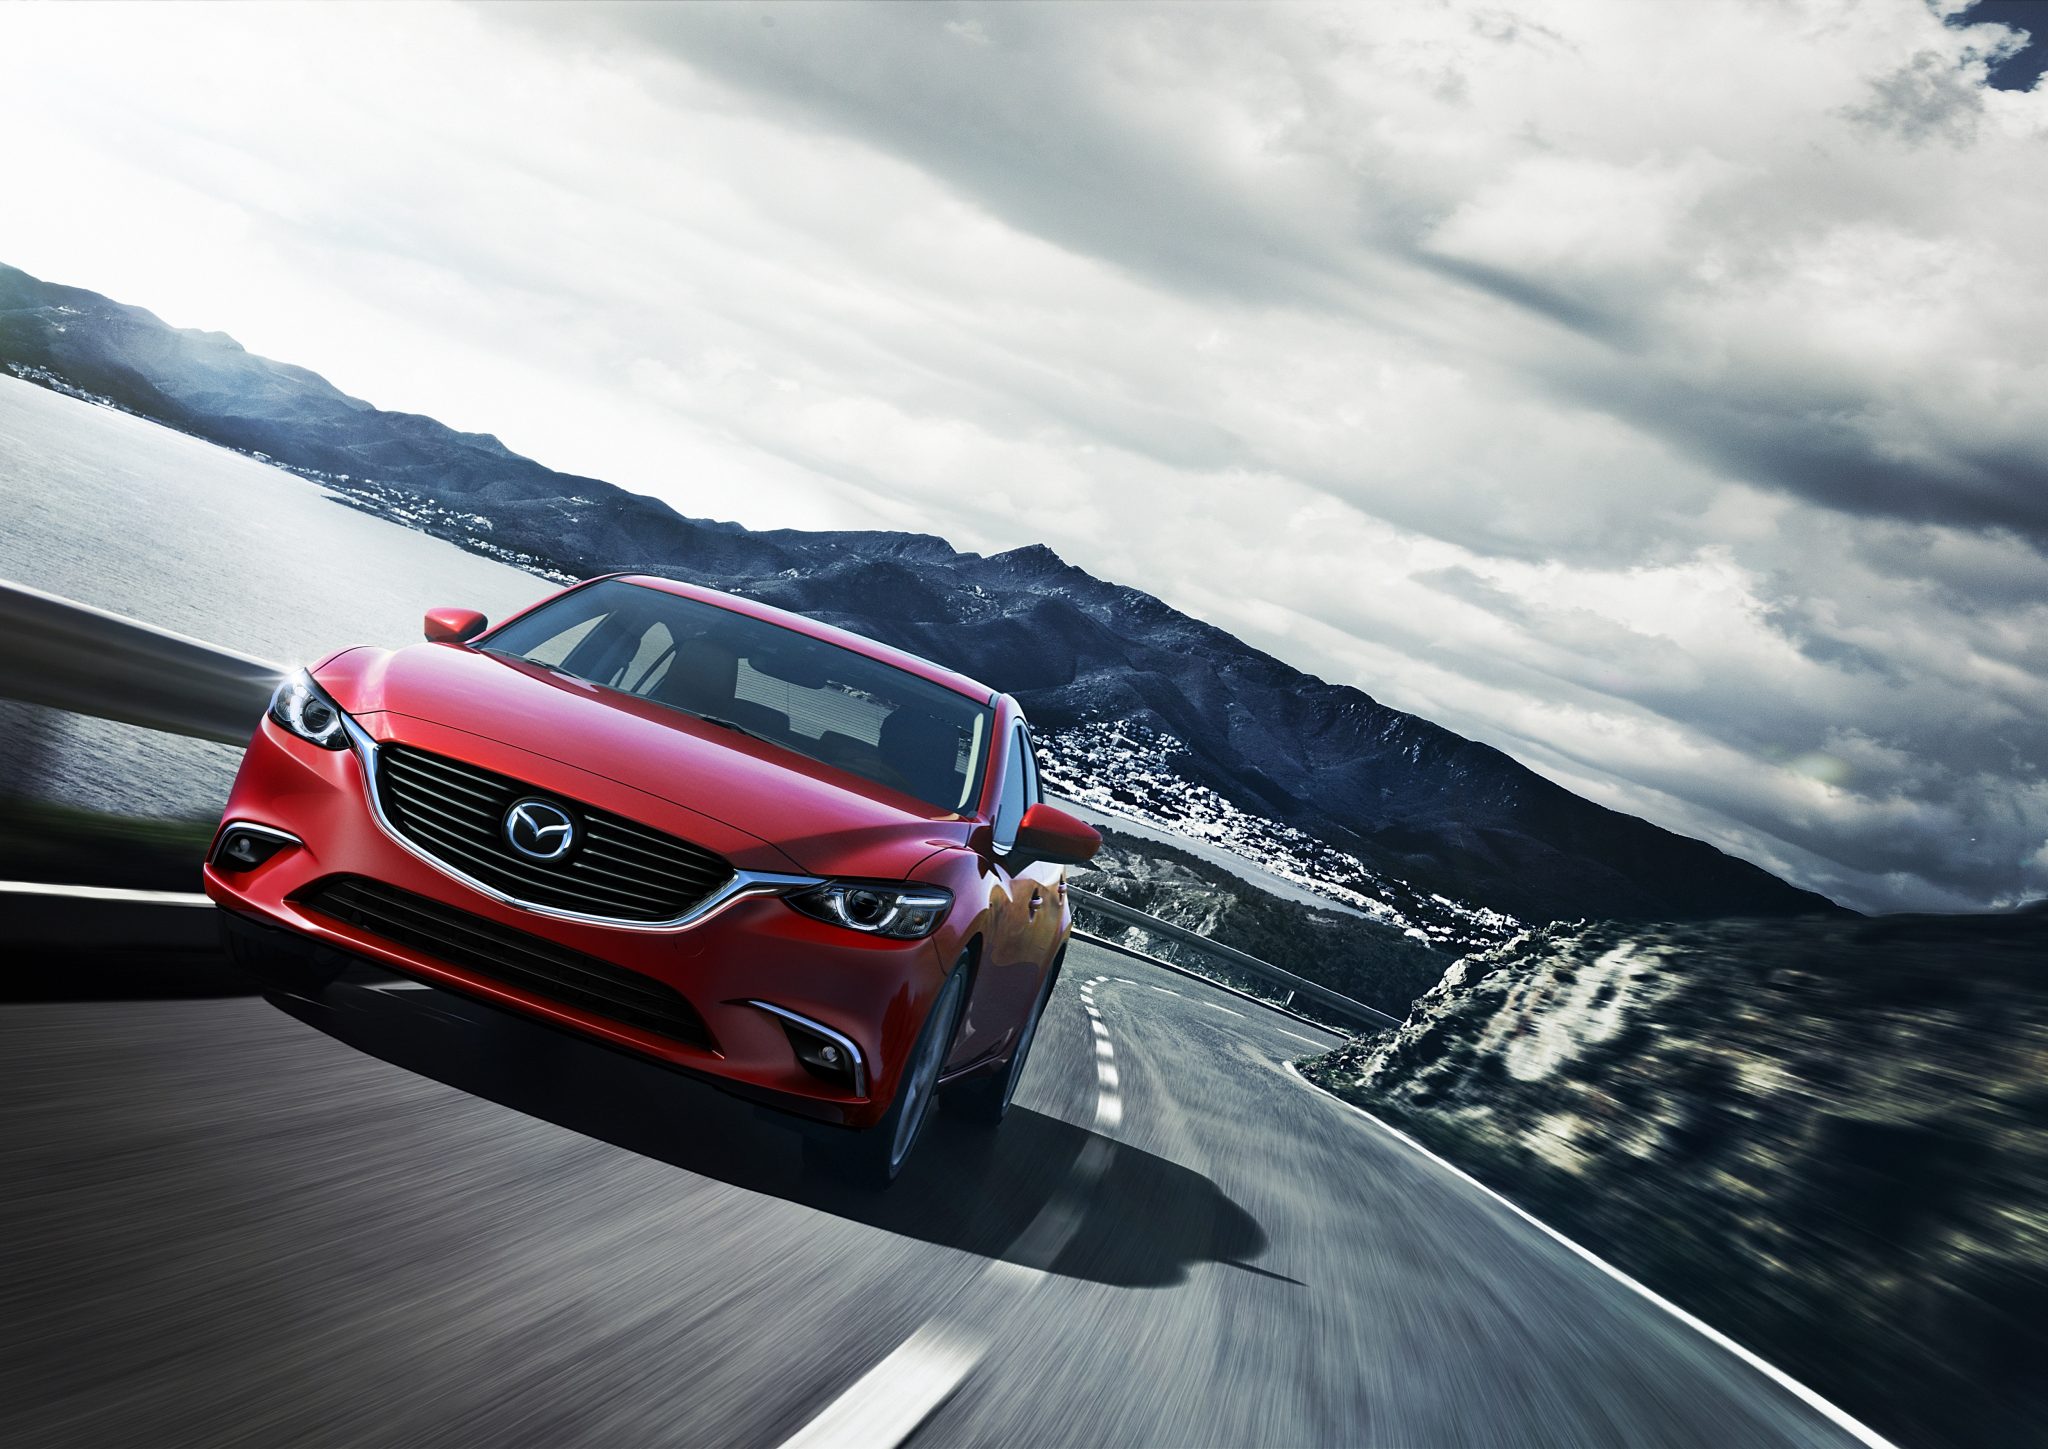 Five Reasons To Fall In LOVE With The 2016 Mazda6!